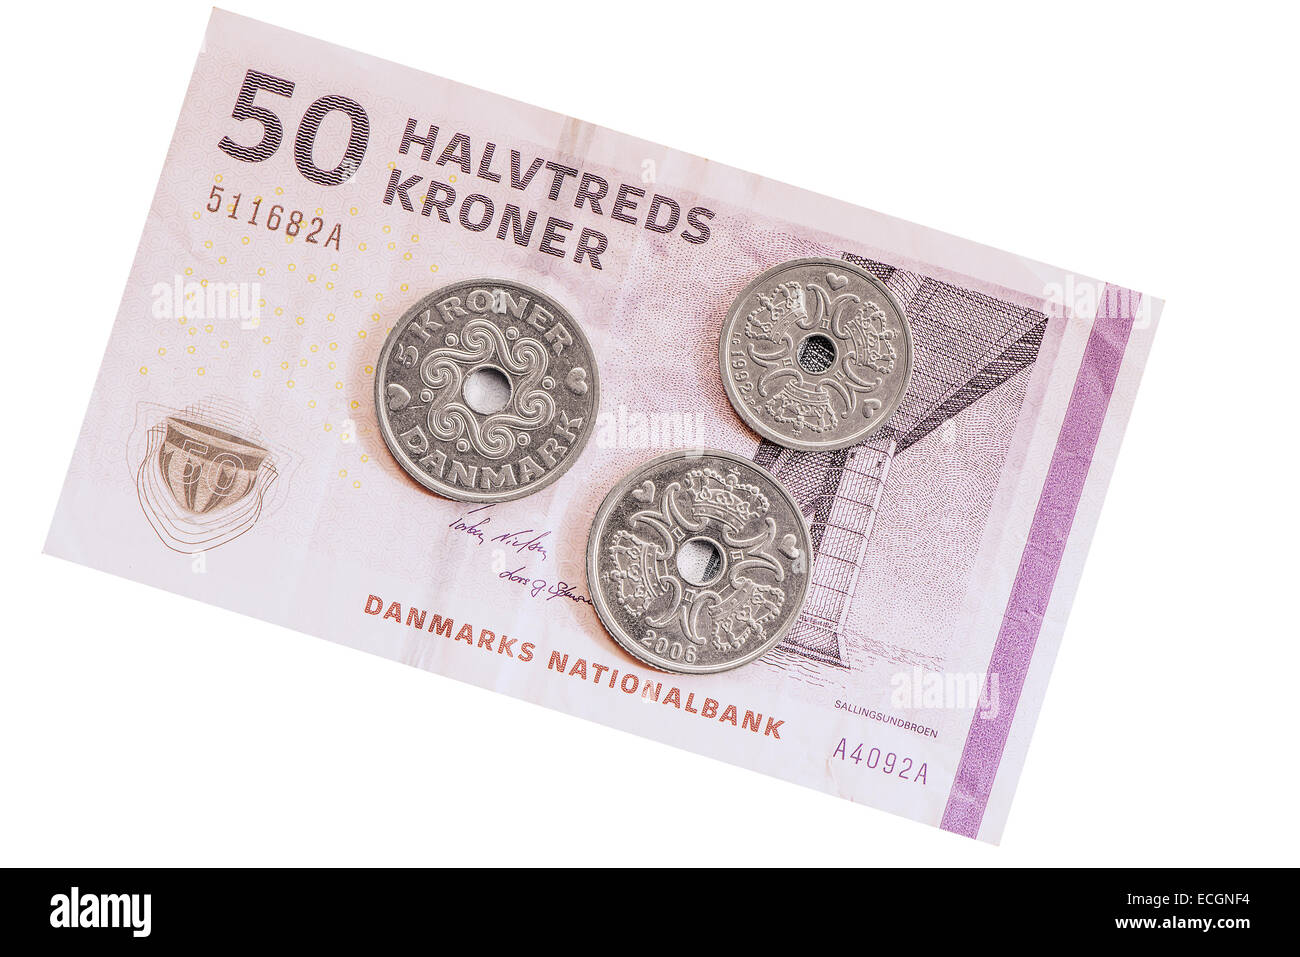 Danish coins on the fifty krones banknote background. Stock Photo